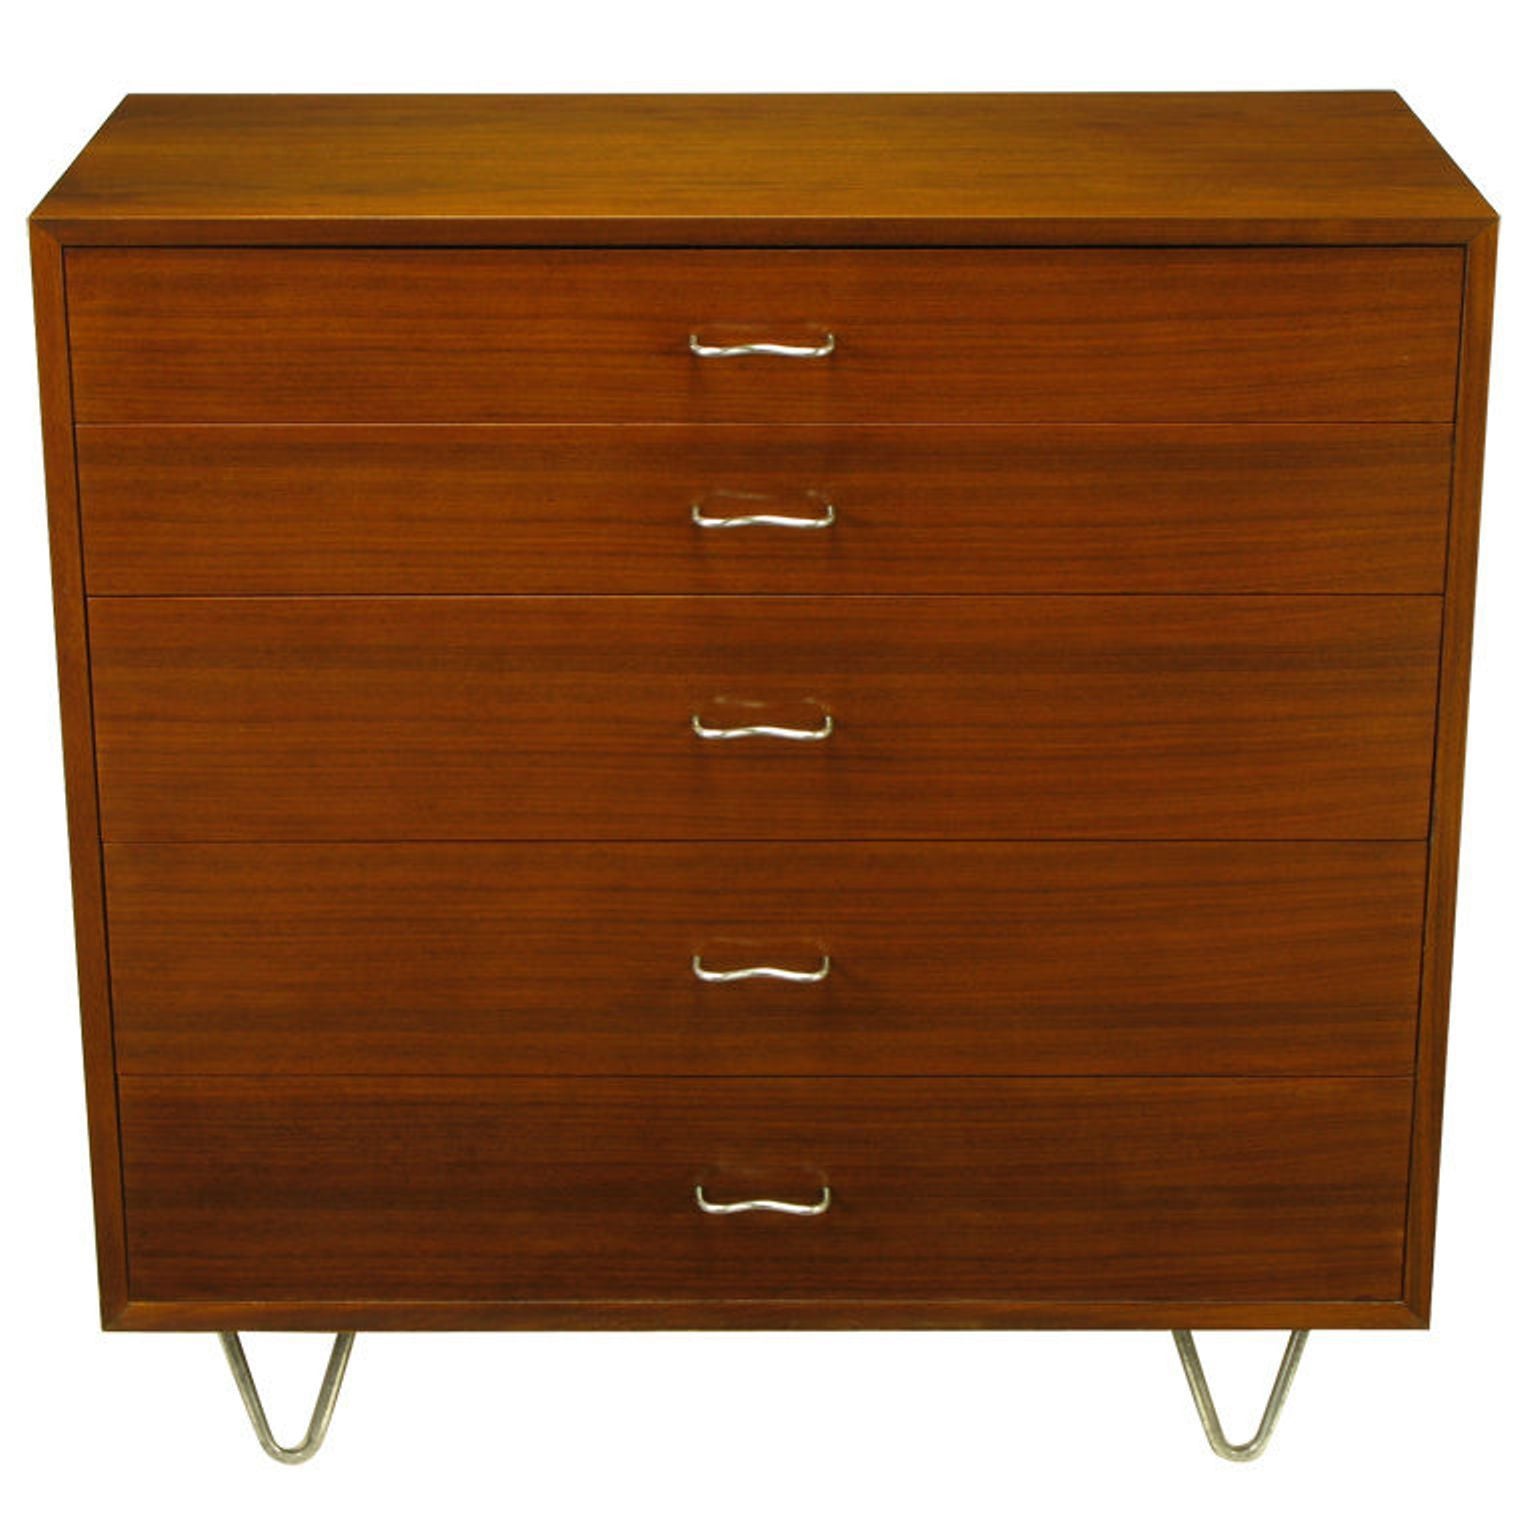 George Nelson Mahogany Five-Drawer Tall Chest